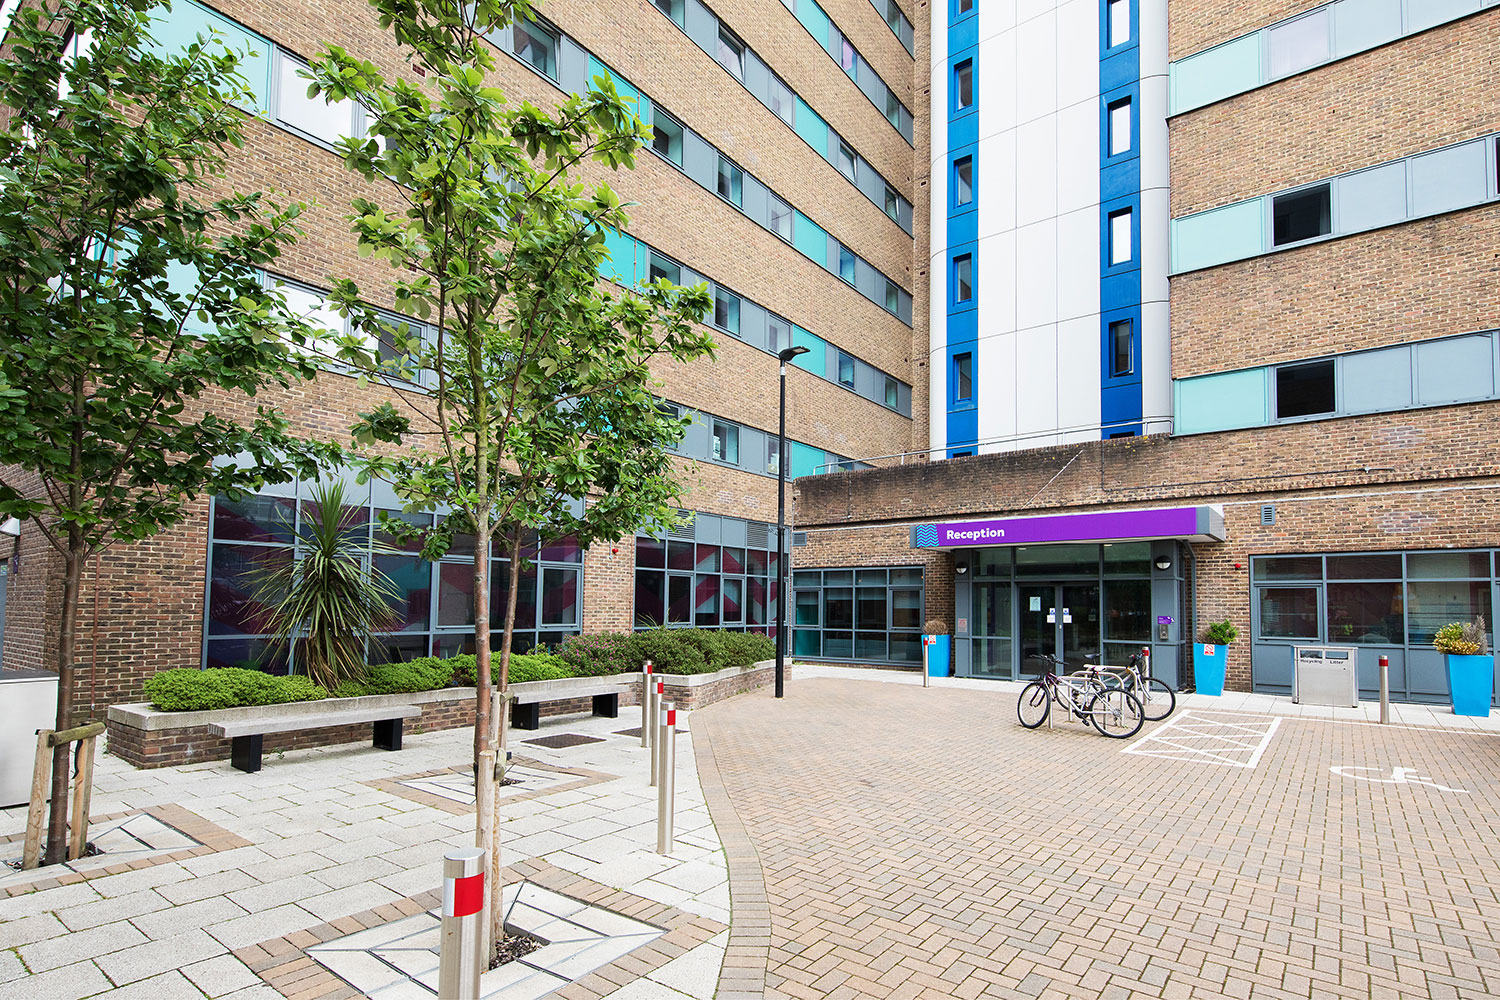 Unite Students accommodation at Orion Point in Southampton